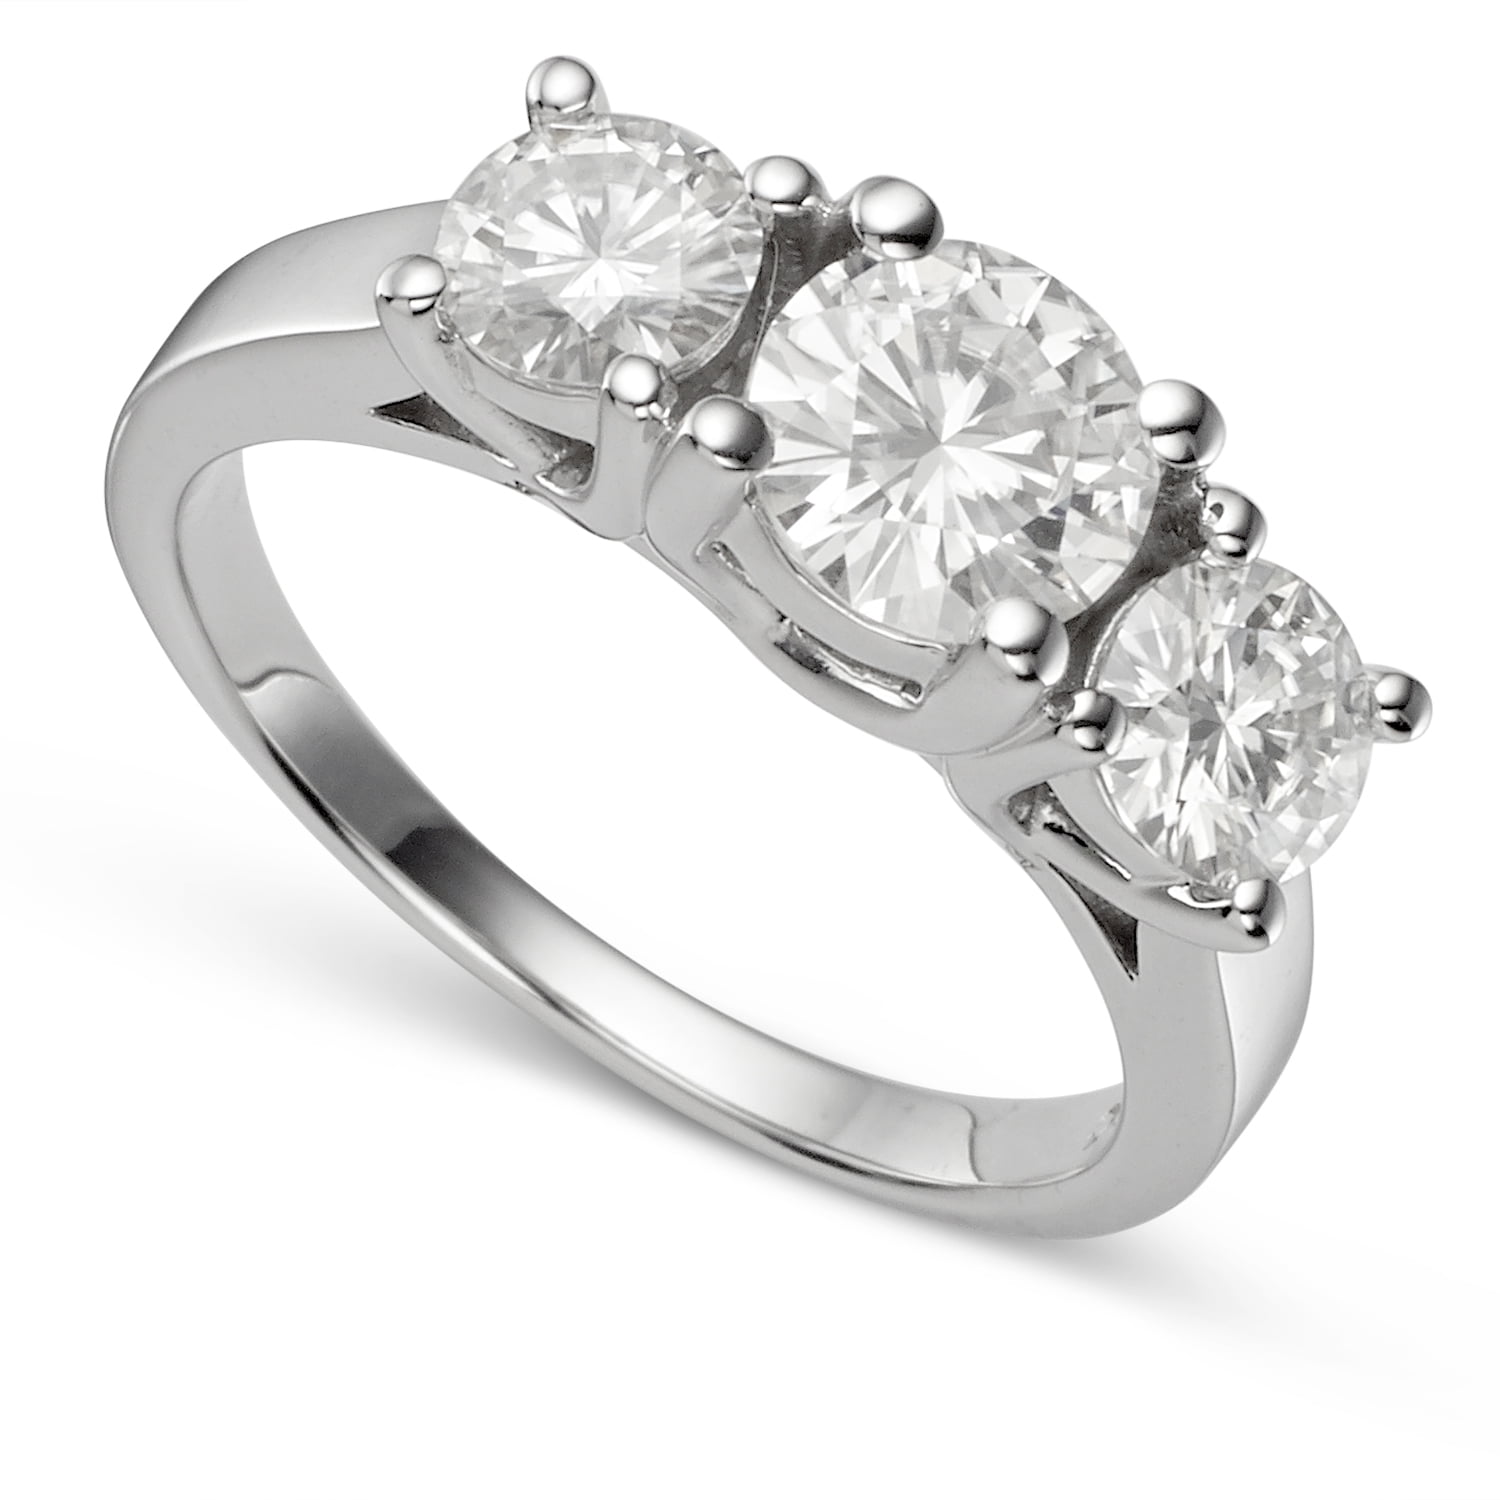 Details about   Lovely 6.5 MM 1 CT Full White Round Brilliant Cut Moissanite Ring with Accents